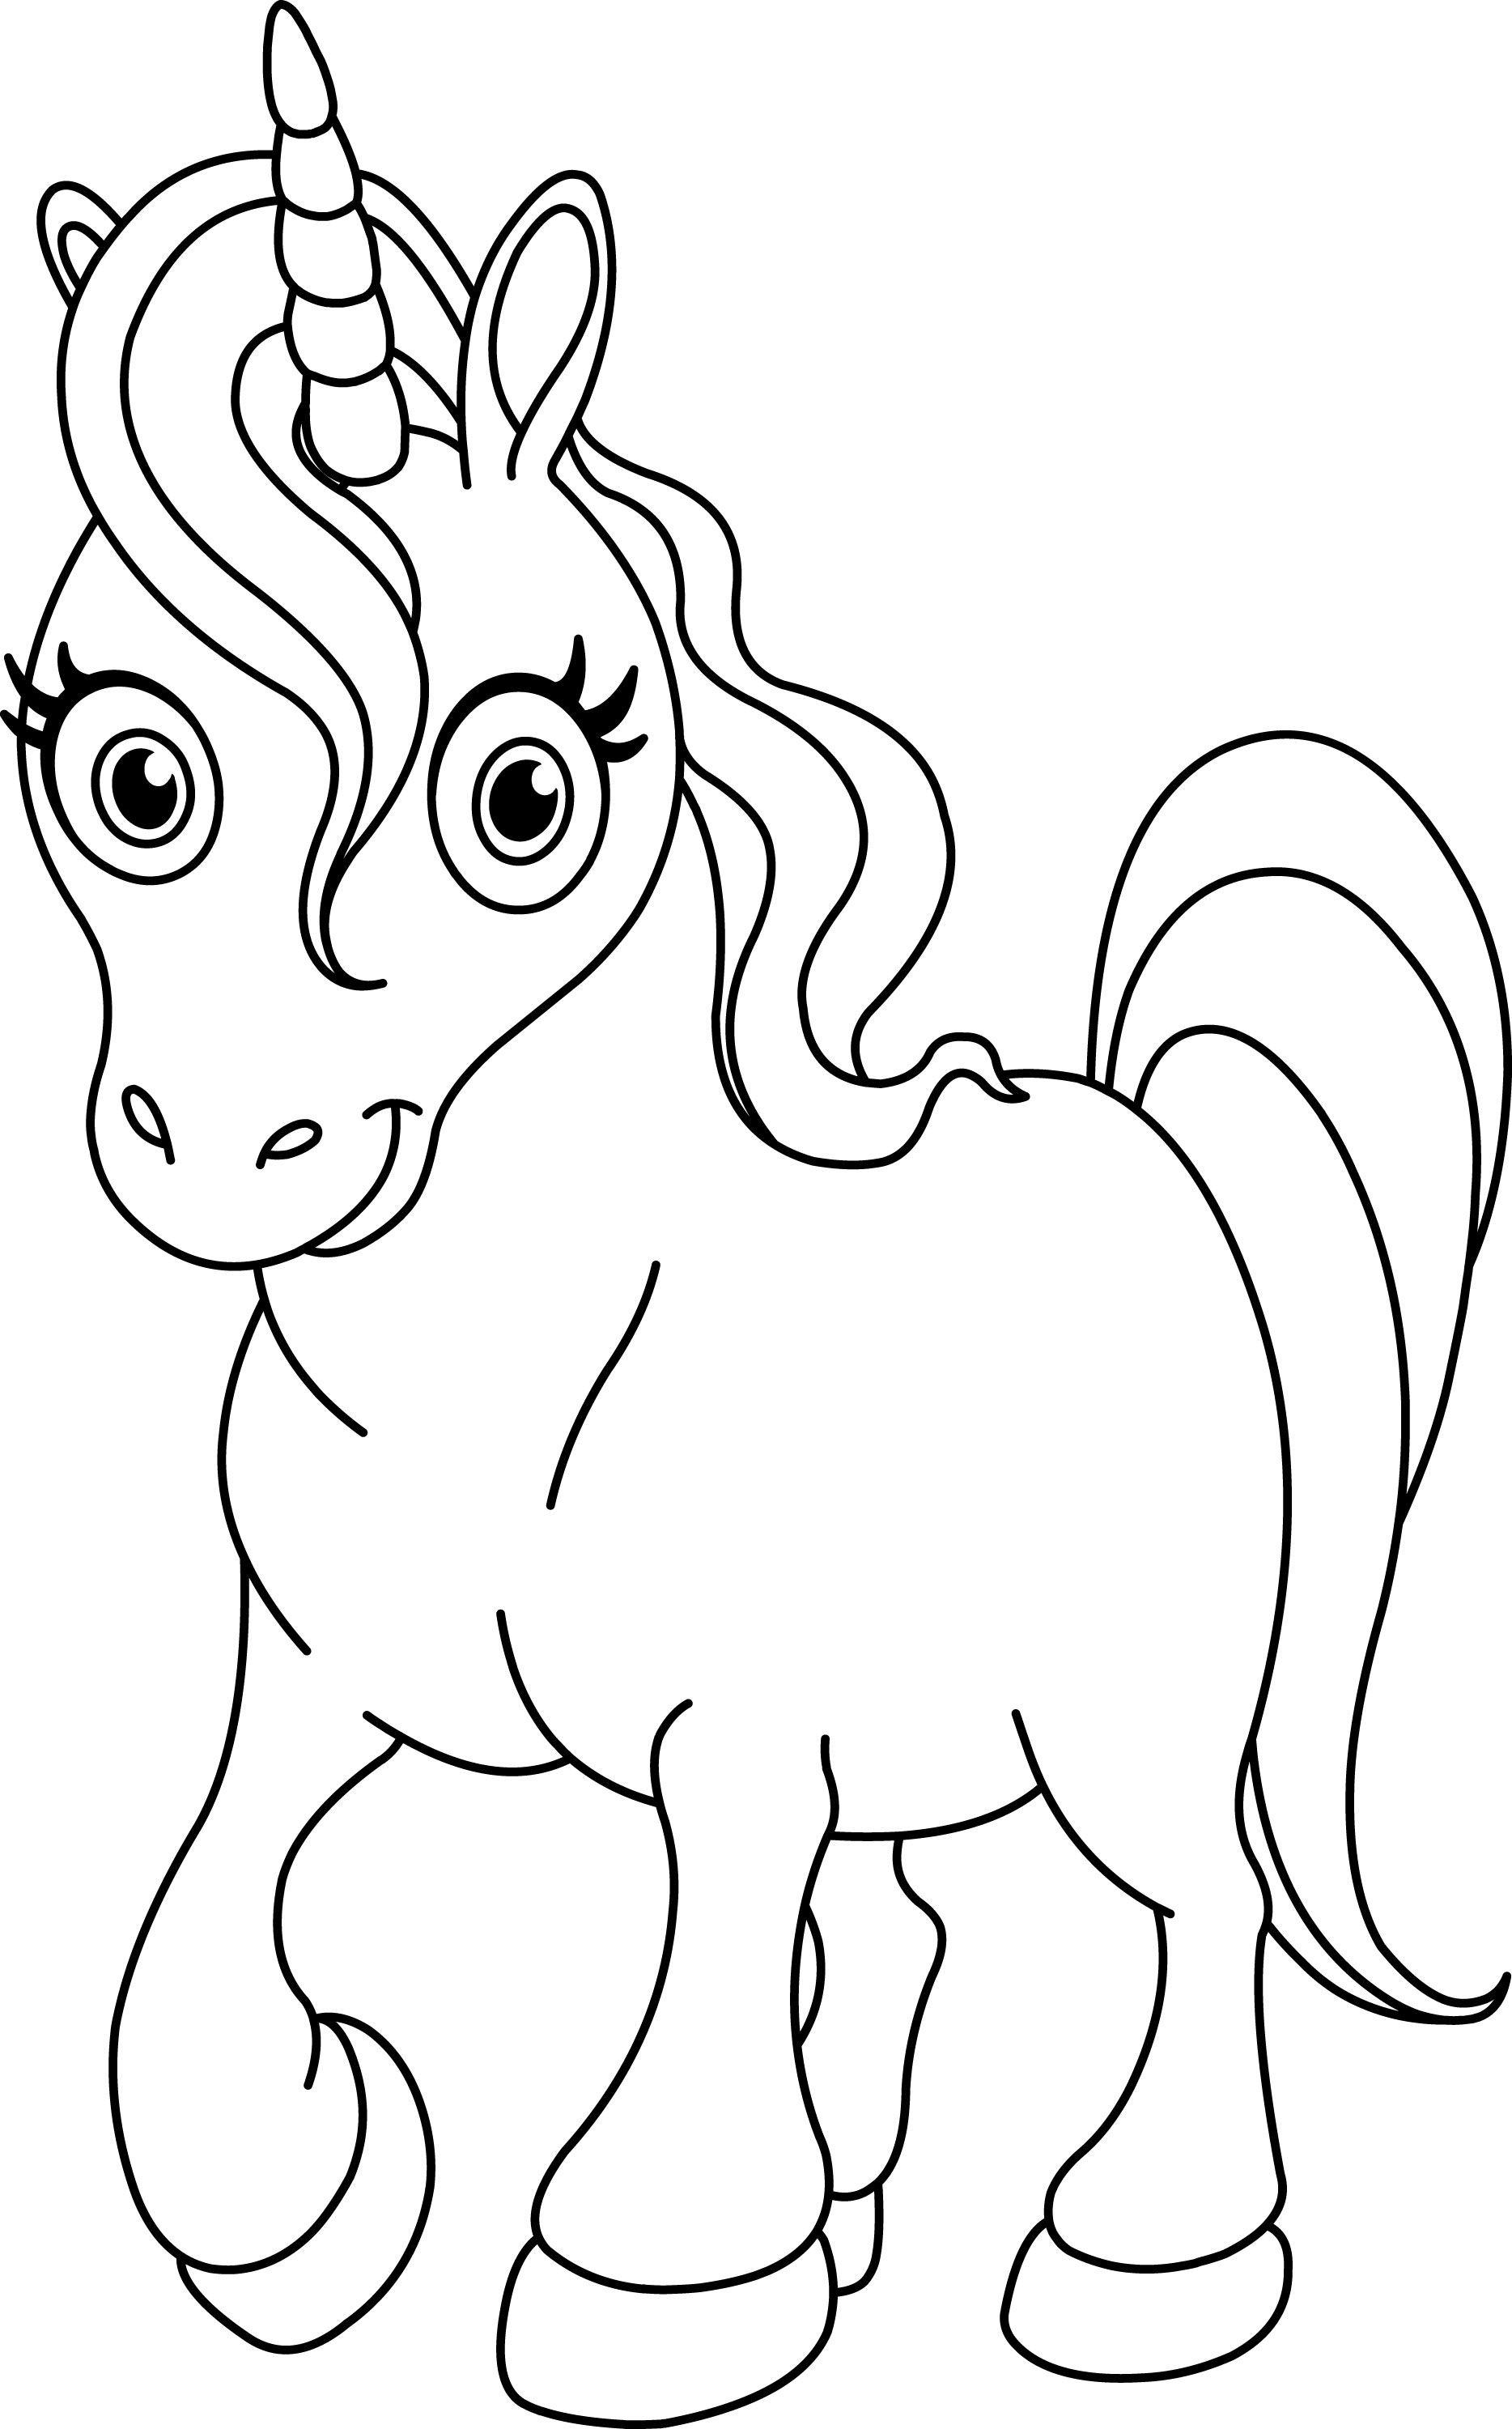 Unicorn Girl Coloring Pages
 Pay attention for this explanation to do the Unicorn